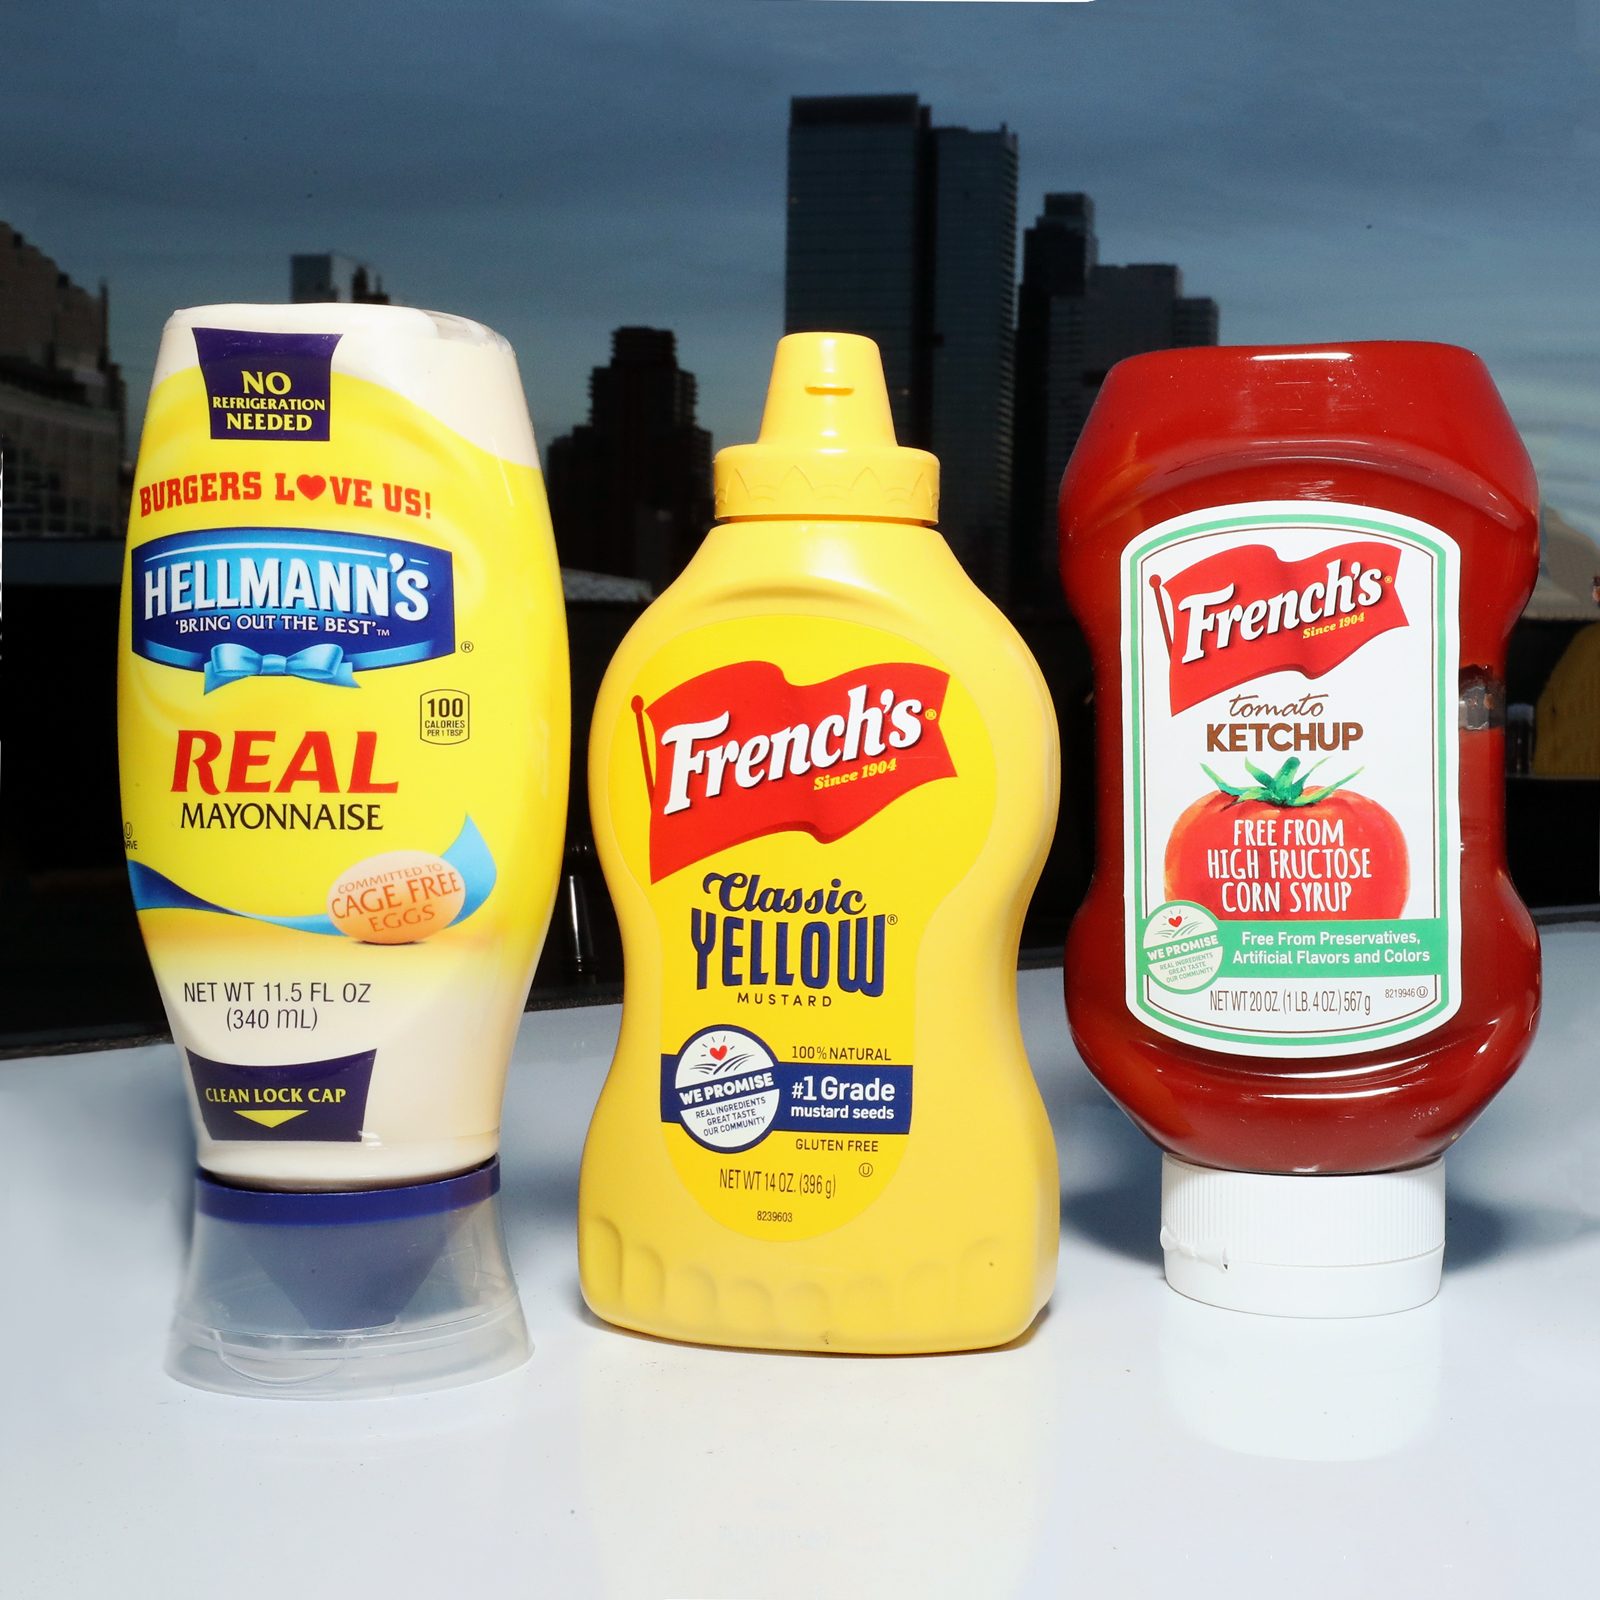 Hellman's mayonnaise, French's mustard and French's ketchup bottles on a table